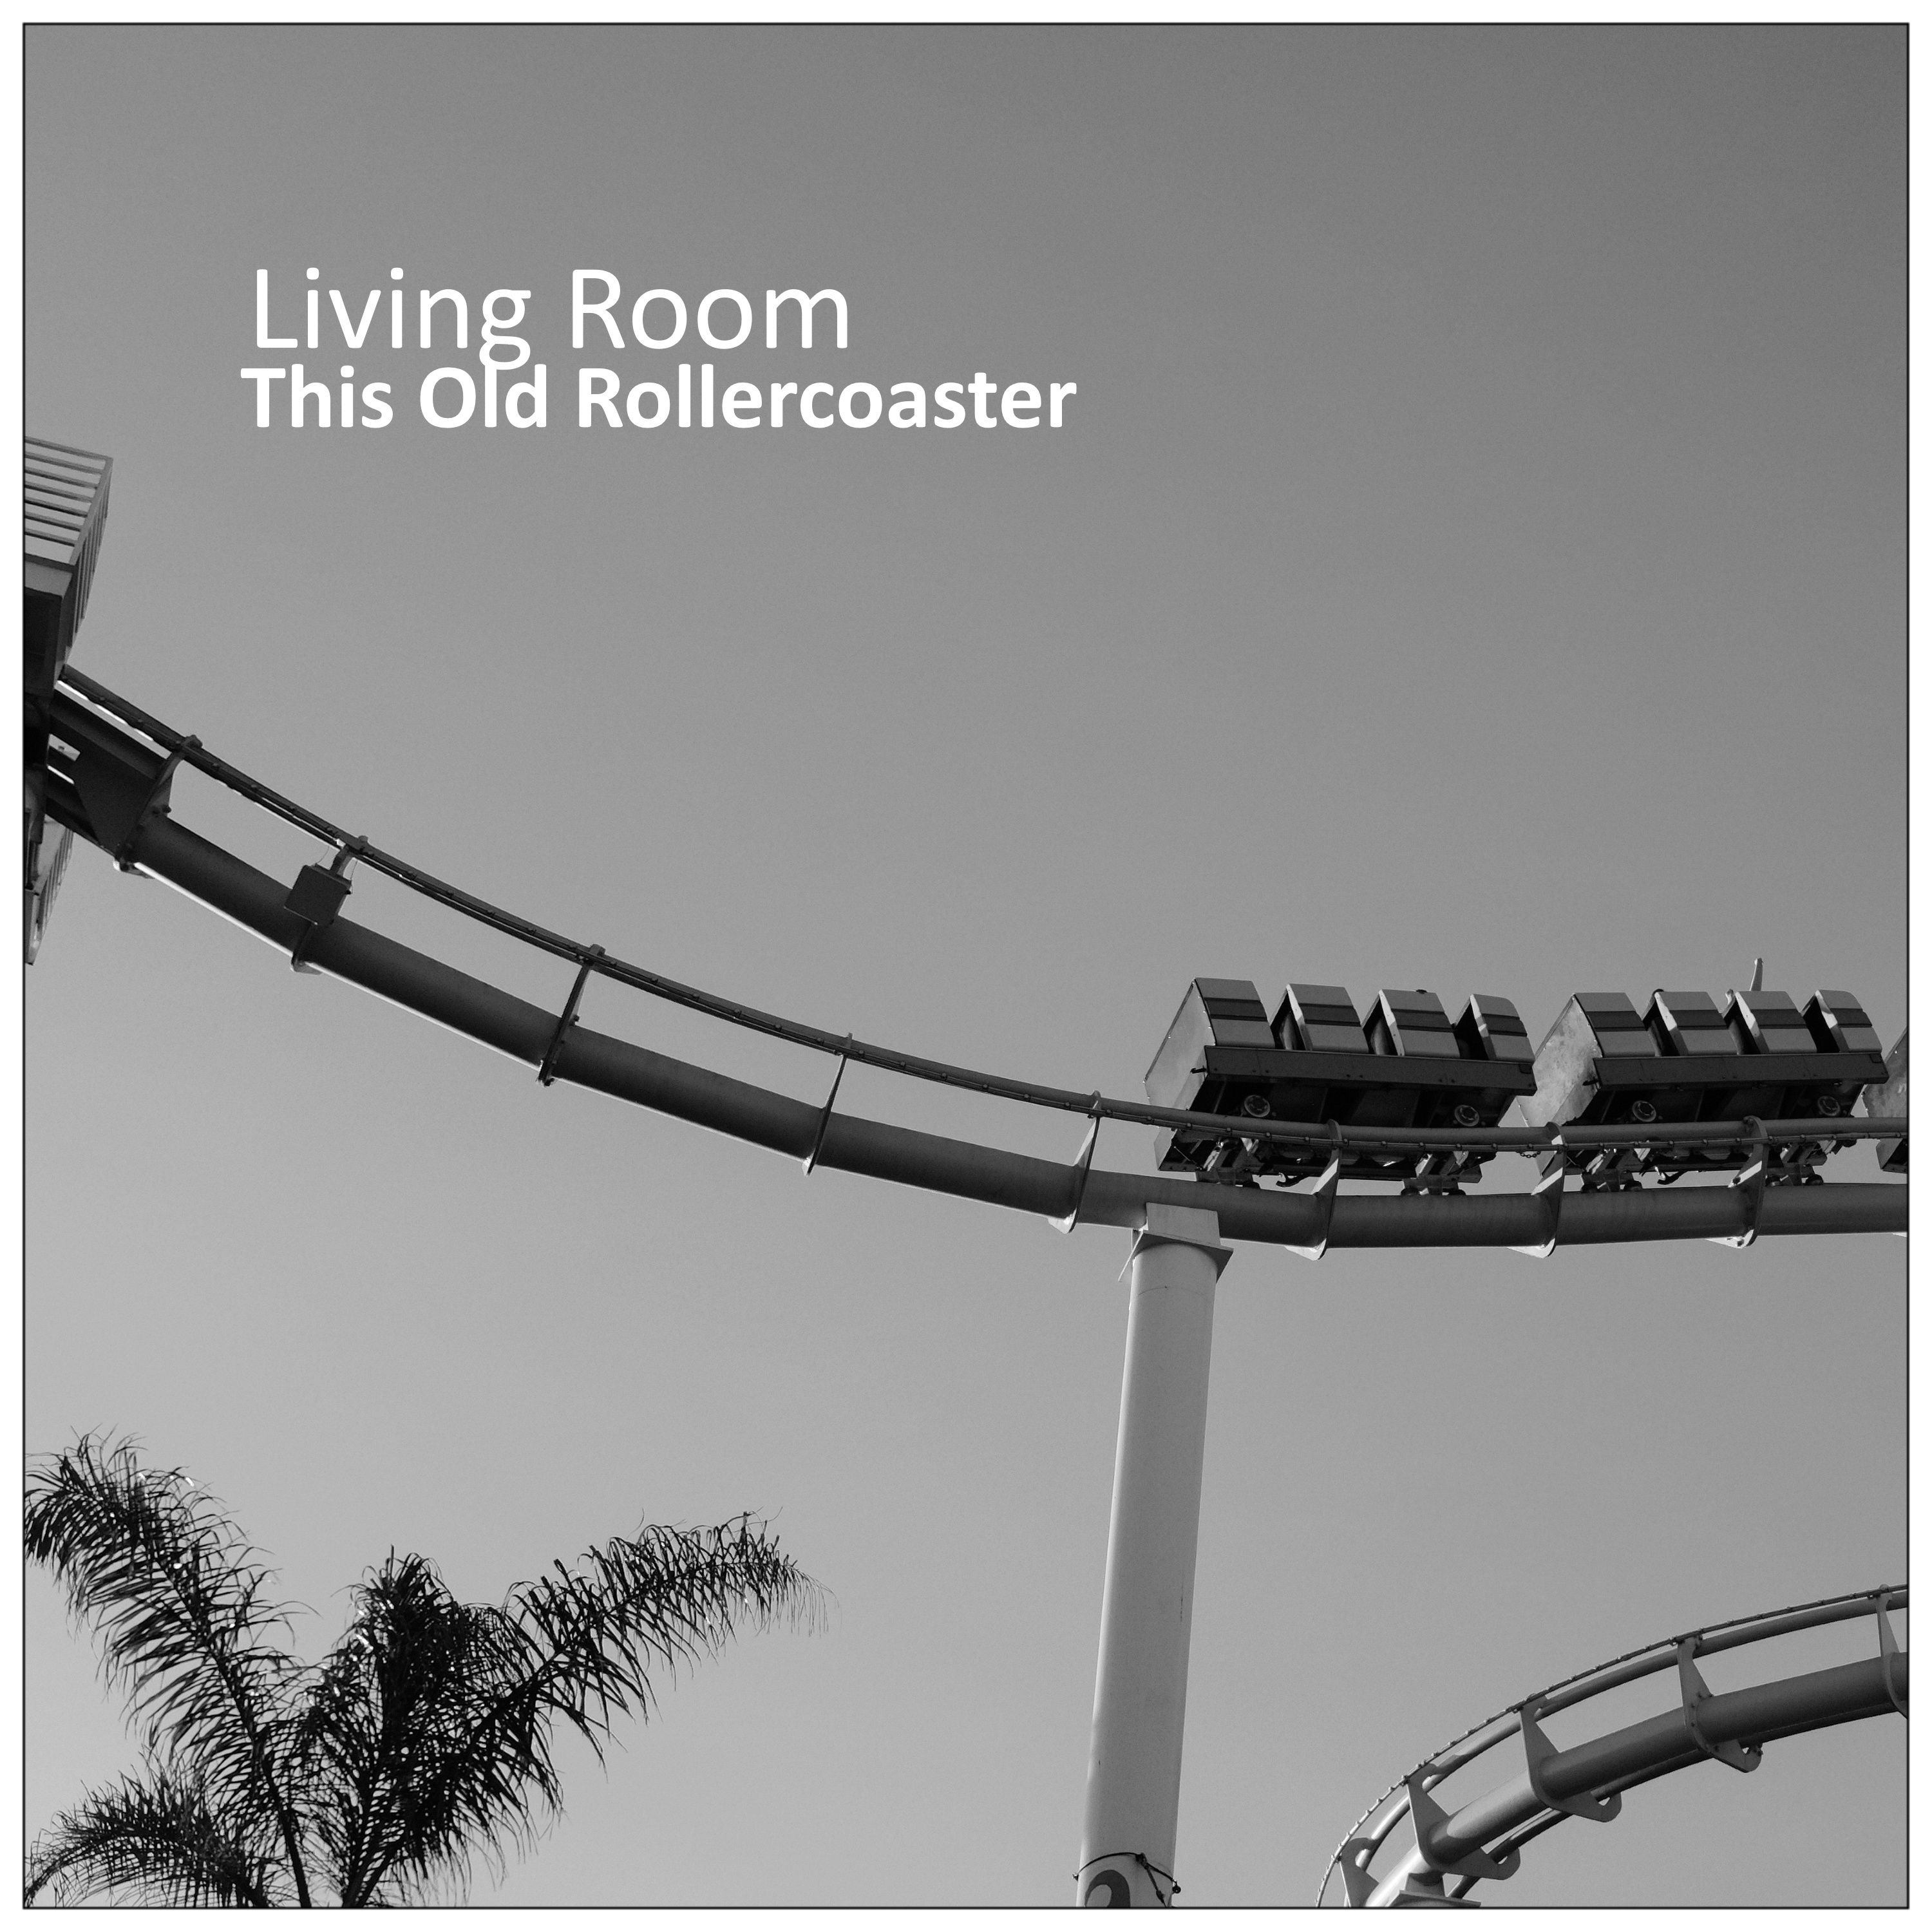 This Old Rollercoaster